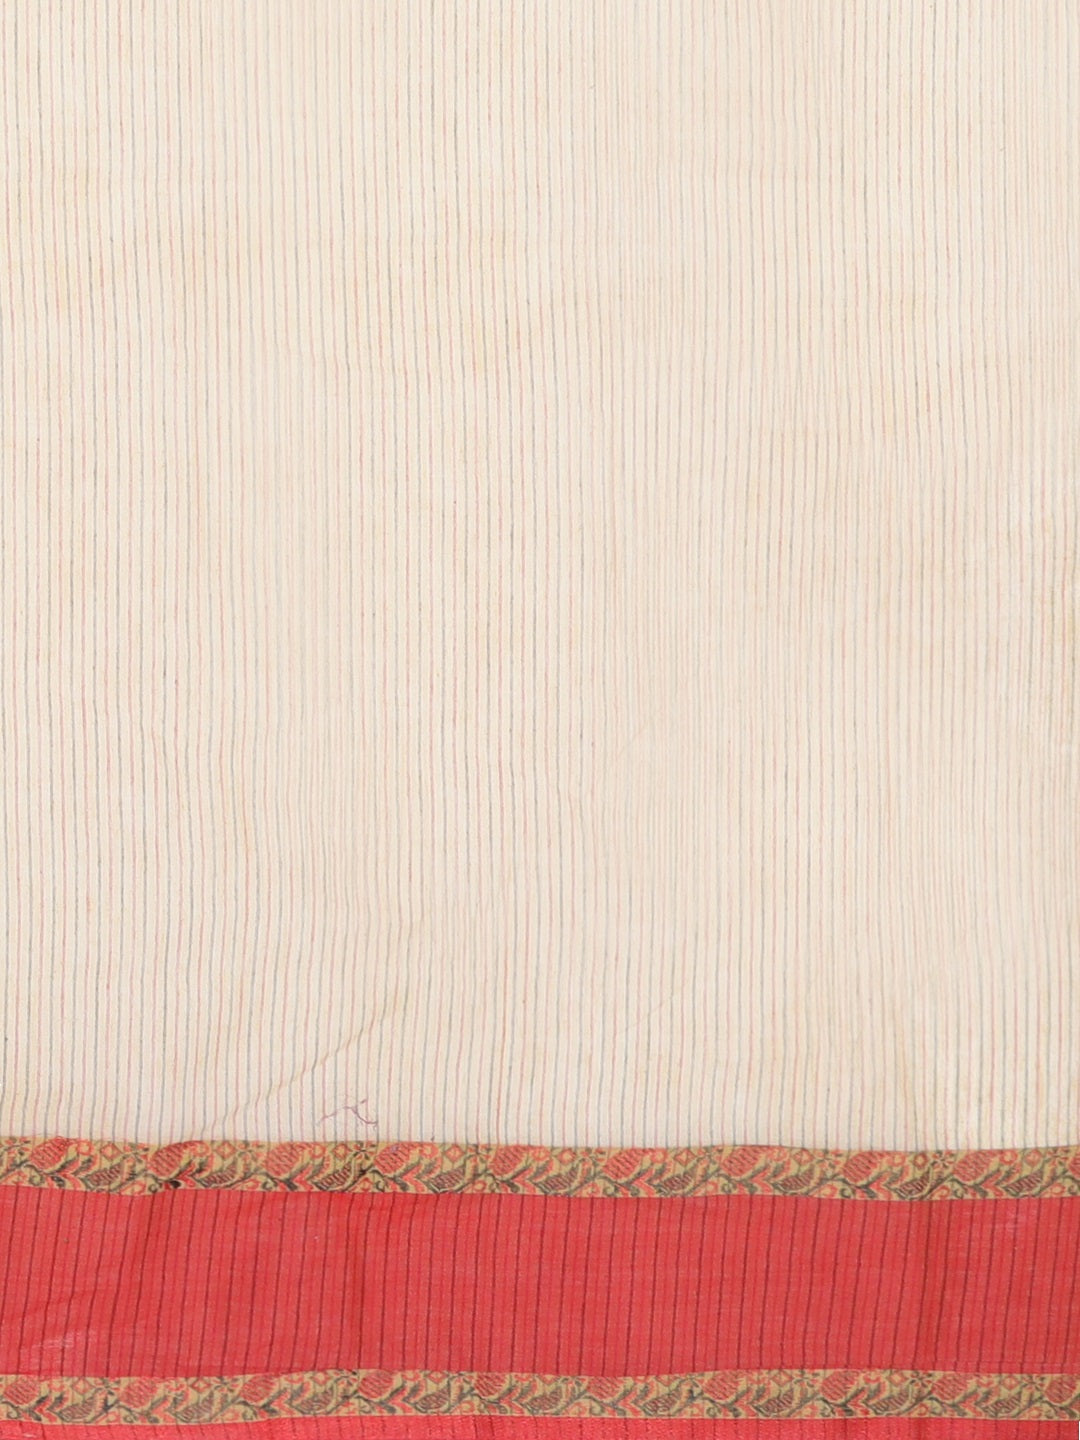 Peach Tant Woven Design Saree Without Blouse Piece DUTASA059 DUTASA059-Saree-Kalakari India-DUTASA059-Geographical Indication, Hand Crafted, Heritage Prints, Natural Dyes, Sarees, Silk Cotton, Sustainable Fabrics, Taant, Tant, West Bengal, Woven-[Linen,Ethnic,wear,Fashionista,Handloom,Handicraft,Indigo,blockprint,block,print,Cotton,Chanderi,Blue, latest,classy,party,bollywood,trendy,summer,style,traditional,formal,elegant,unique,style,hand,block,print, dabu,booti,gift,present,glamorous,affordabl